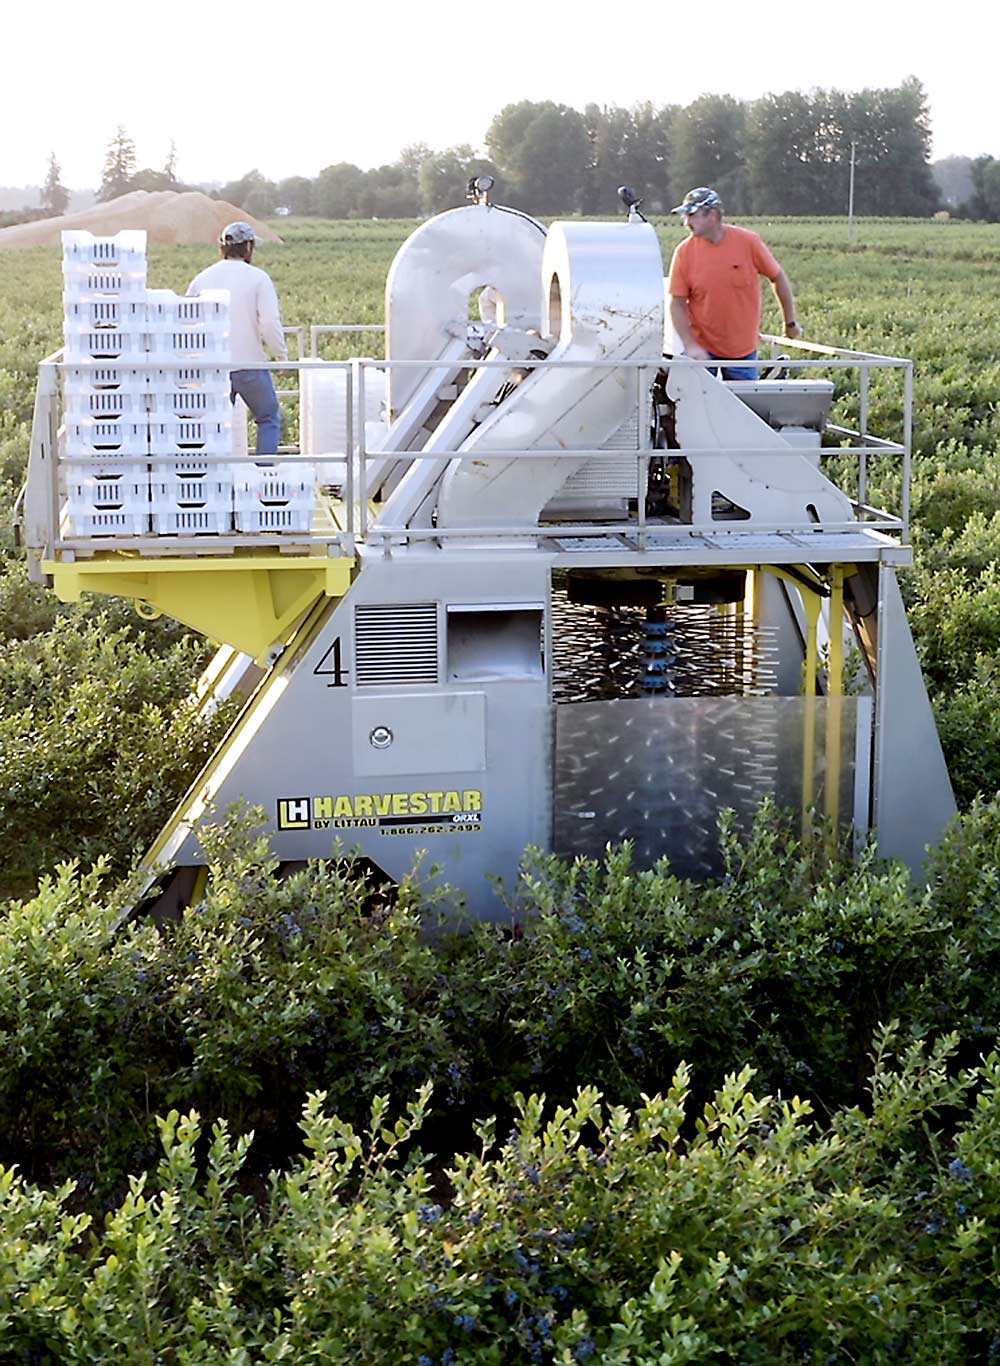 Littau Harvester of Stayton, Oregon, has recently commercialized shaker heads with True Orbit, a technology that wiggles picking tines in a perfect circle, reducing the shock to berries as they detach from the bush. The machine also uses angled catch surfaces to soften the blow. (Courtesy Littau Harvester)